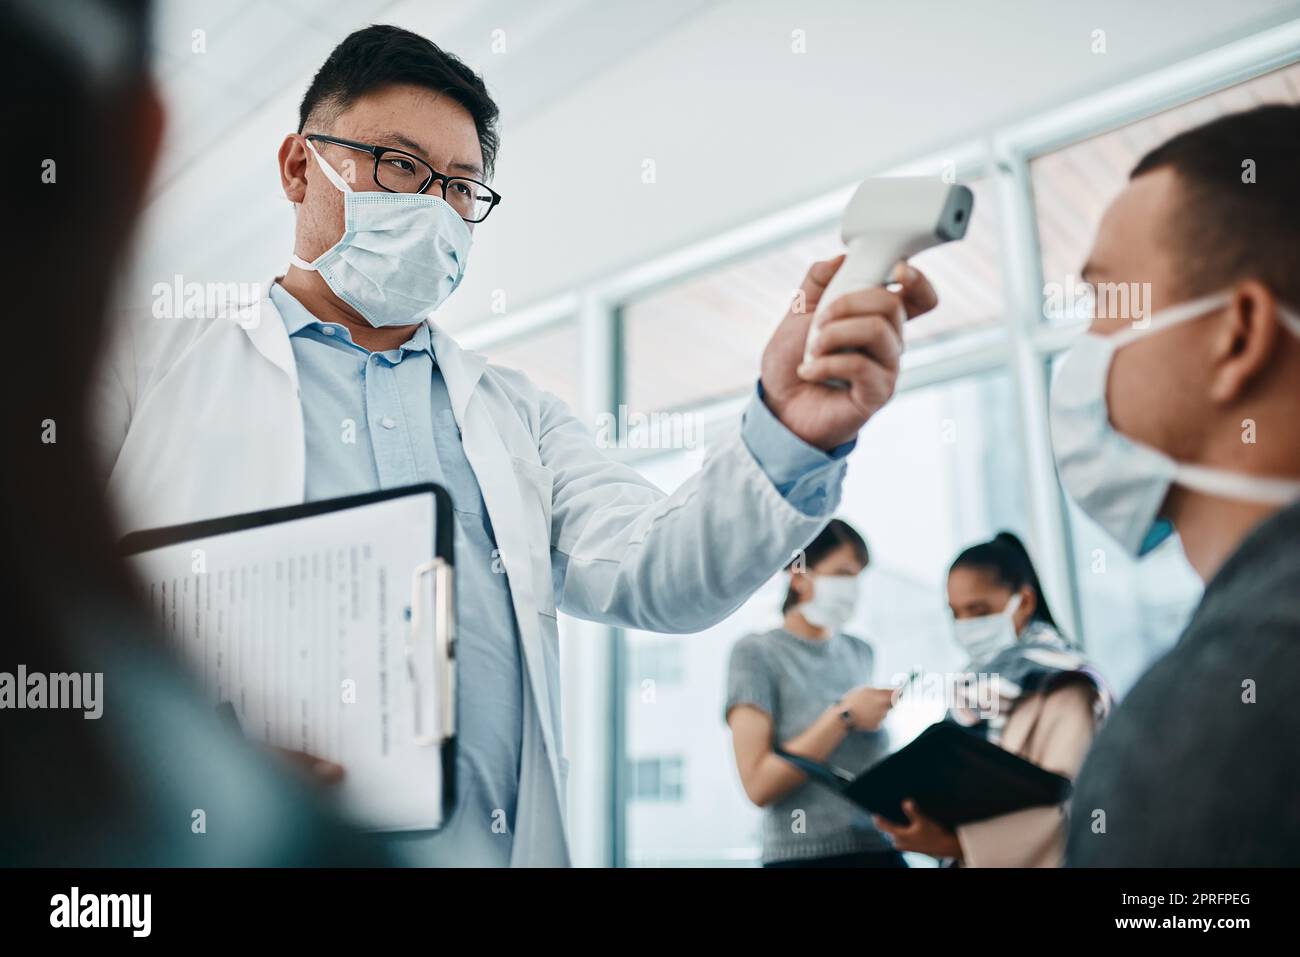 Doctor testing covid temperate in hospital appointment to prevent the spread of the virus. Healthcare compliance worker with health insurance document and face mask checking or scanning patient head Stock Photo